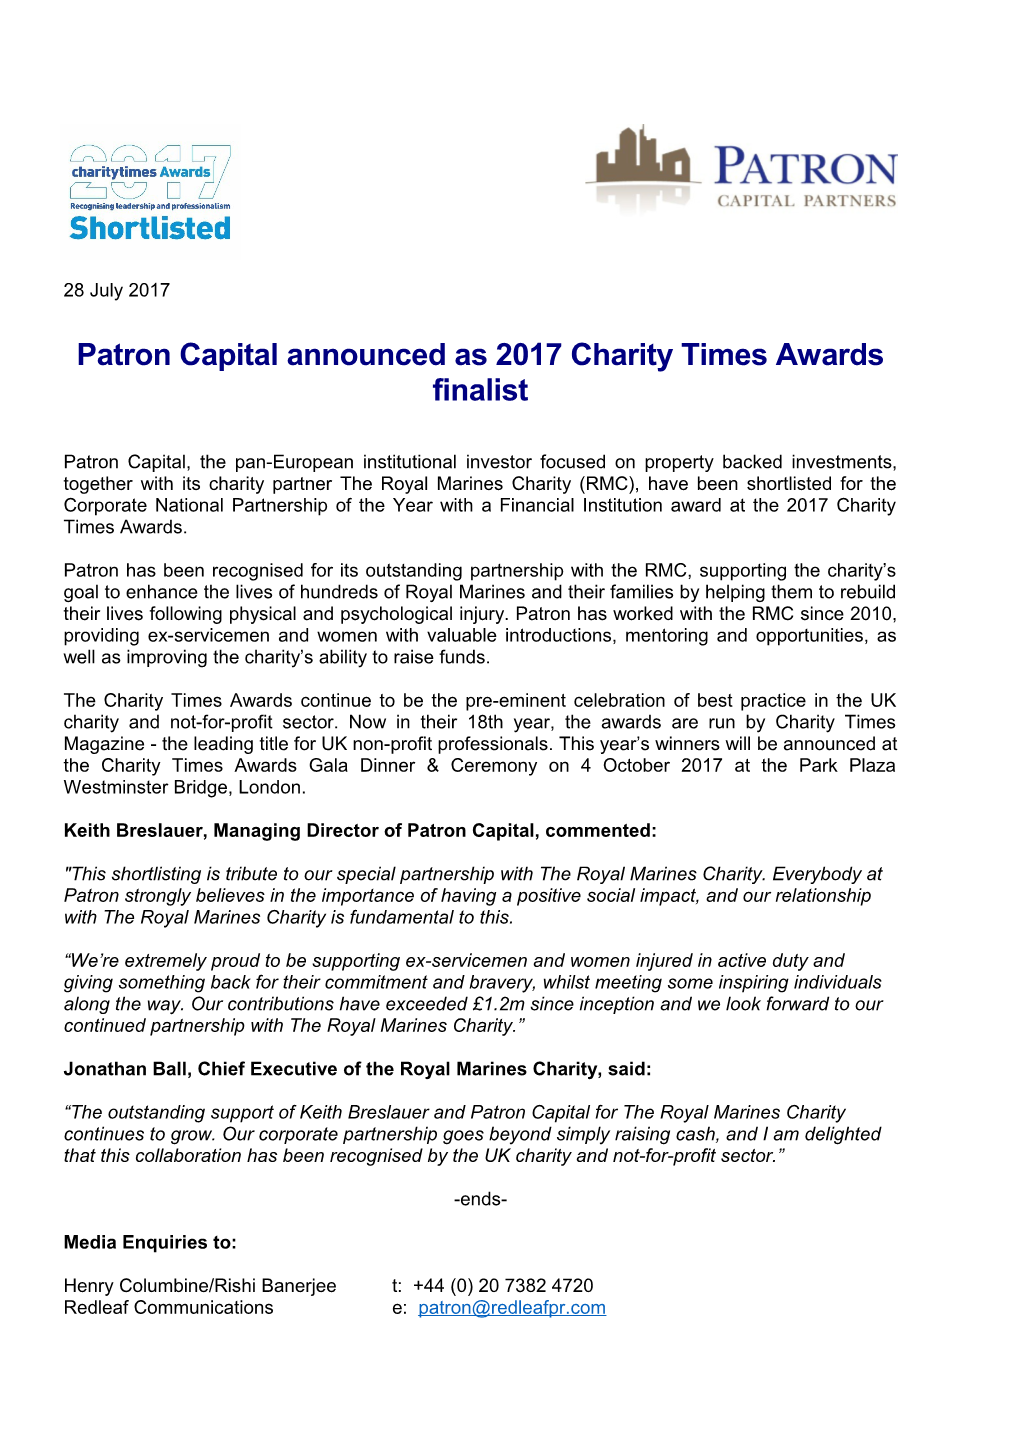 Patron Capital Announced As 2017 Charity Times Awards Finalist